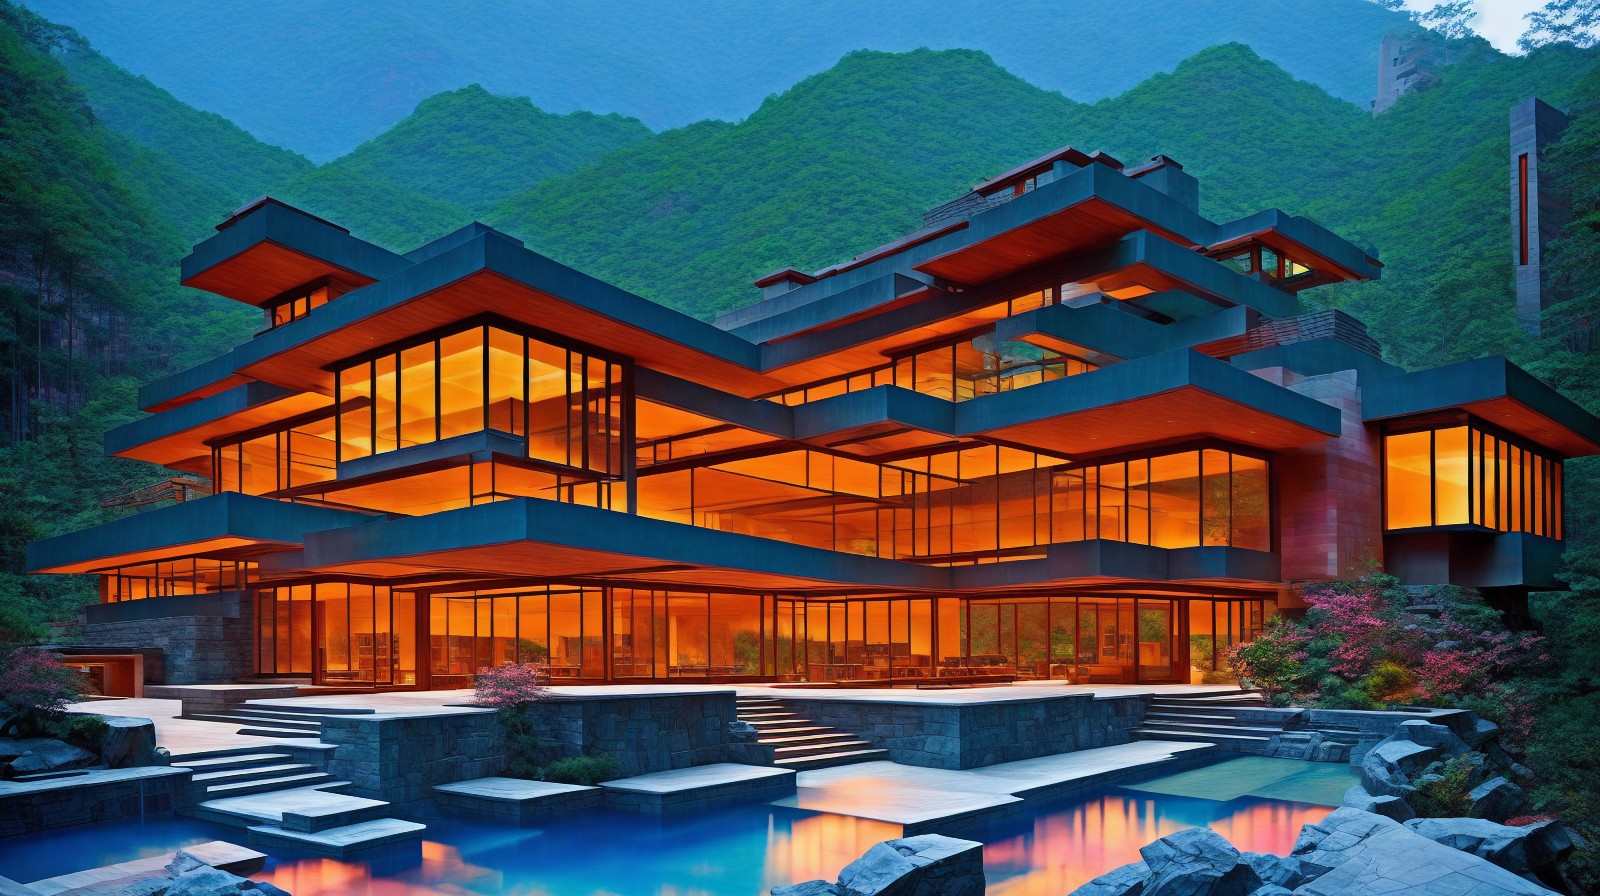 Fallingwater on the Hill, modeled on Wright's style